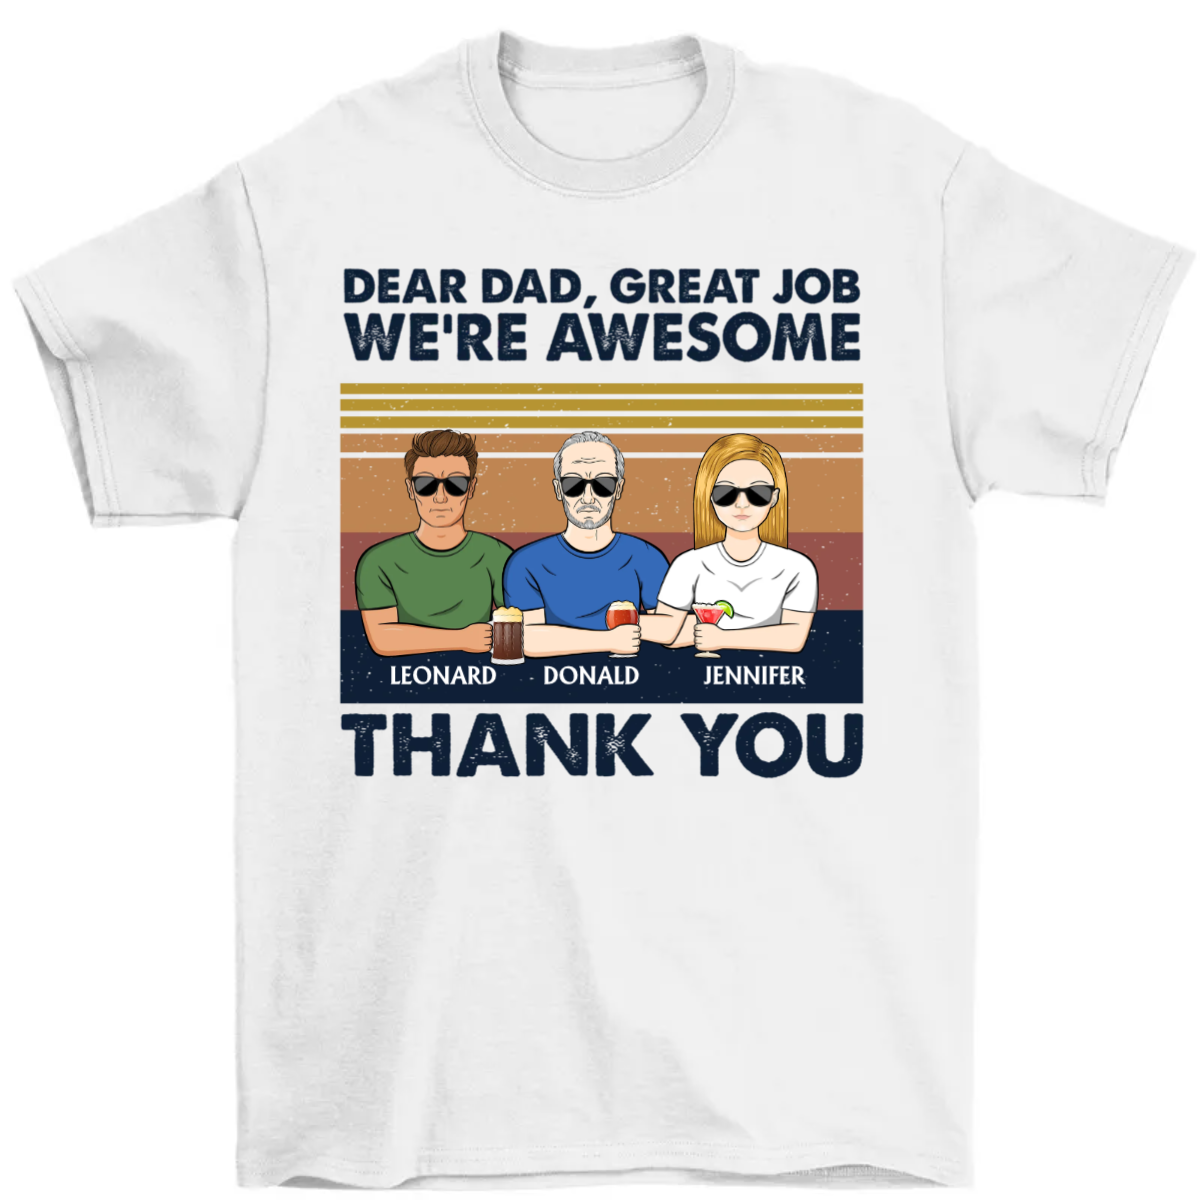 Dear Dad Great Job I'm Awesome Thank You - Father Gift - Personalized Custom T Shirt